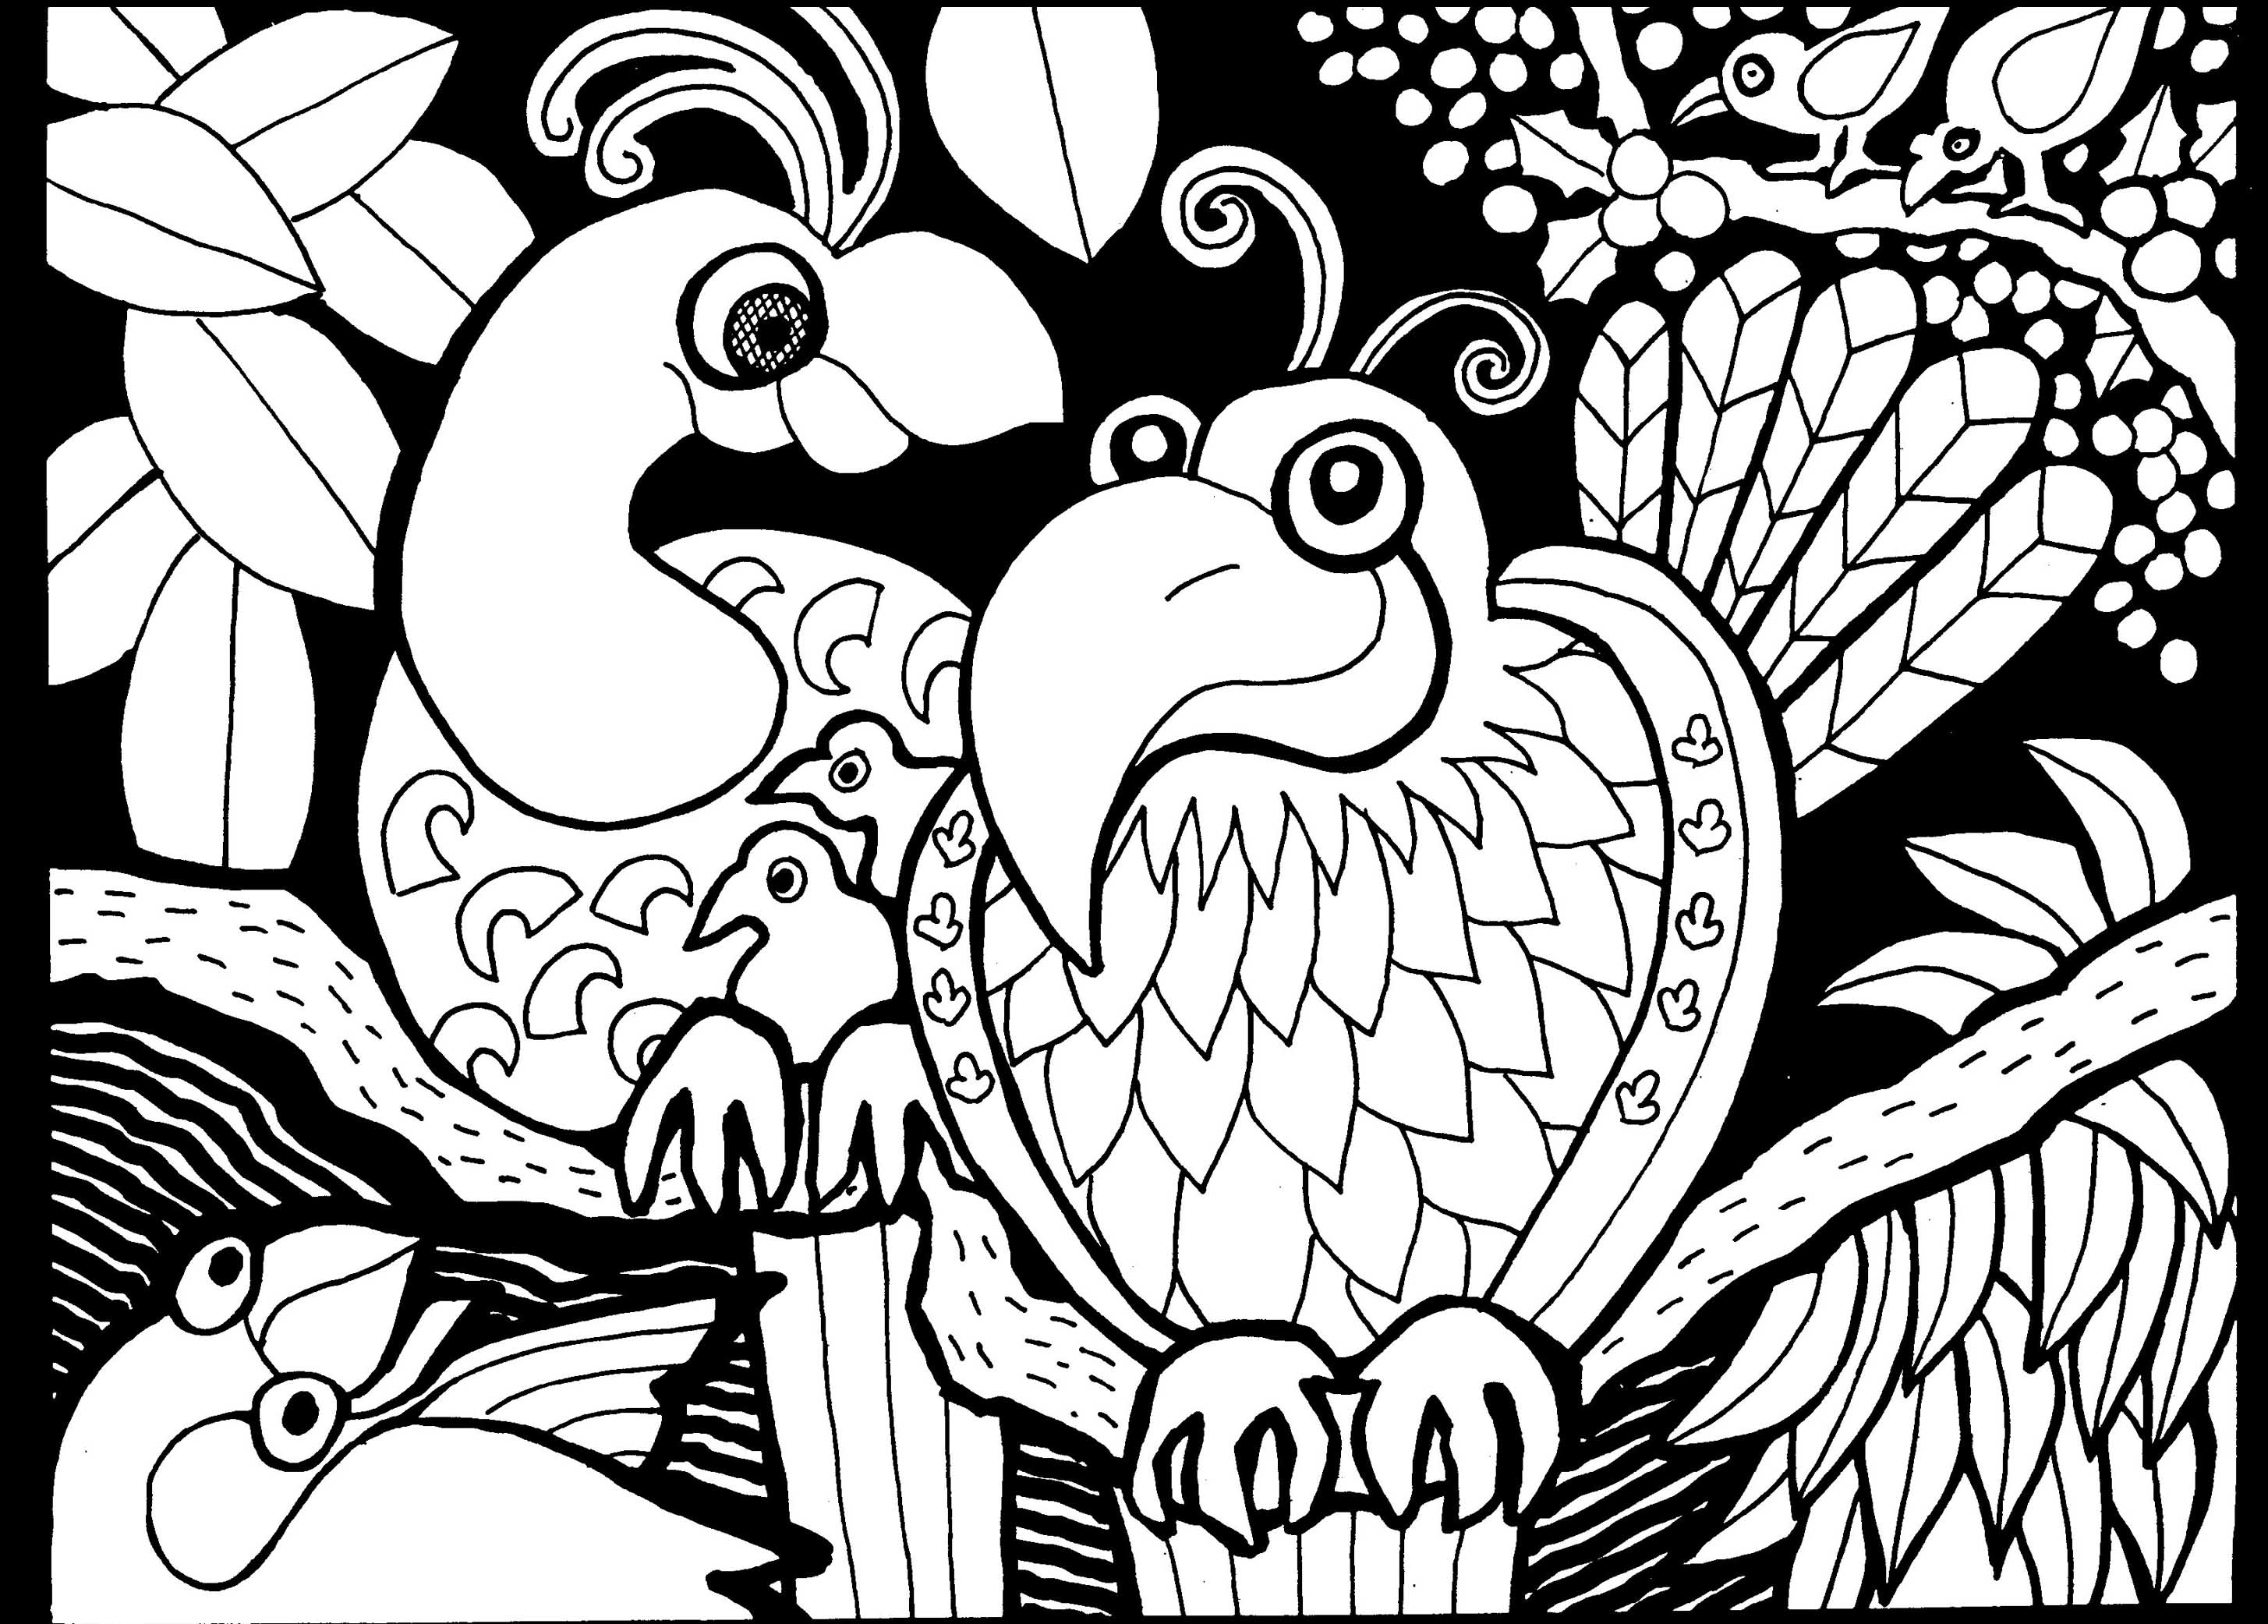 Download Africa parrots - Africa Adult Coloring Pages